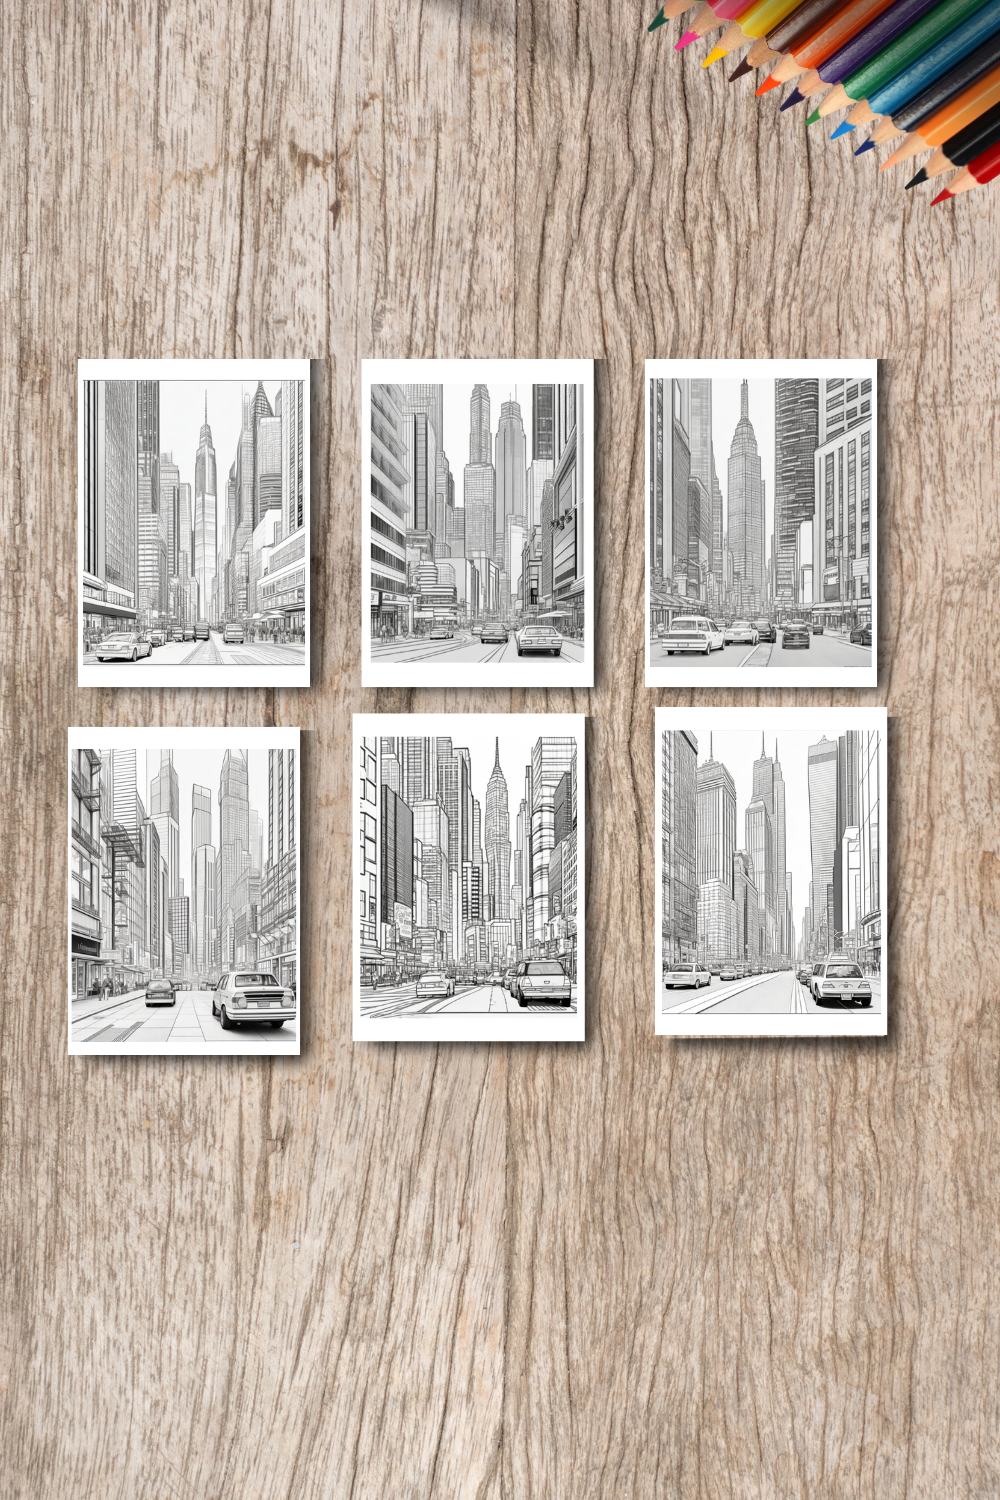 A cityscape with skyscrapers and a busy street scene coloring 3 pinterest preview image.